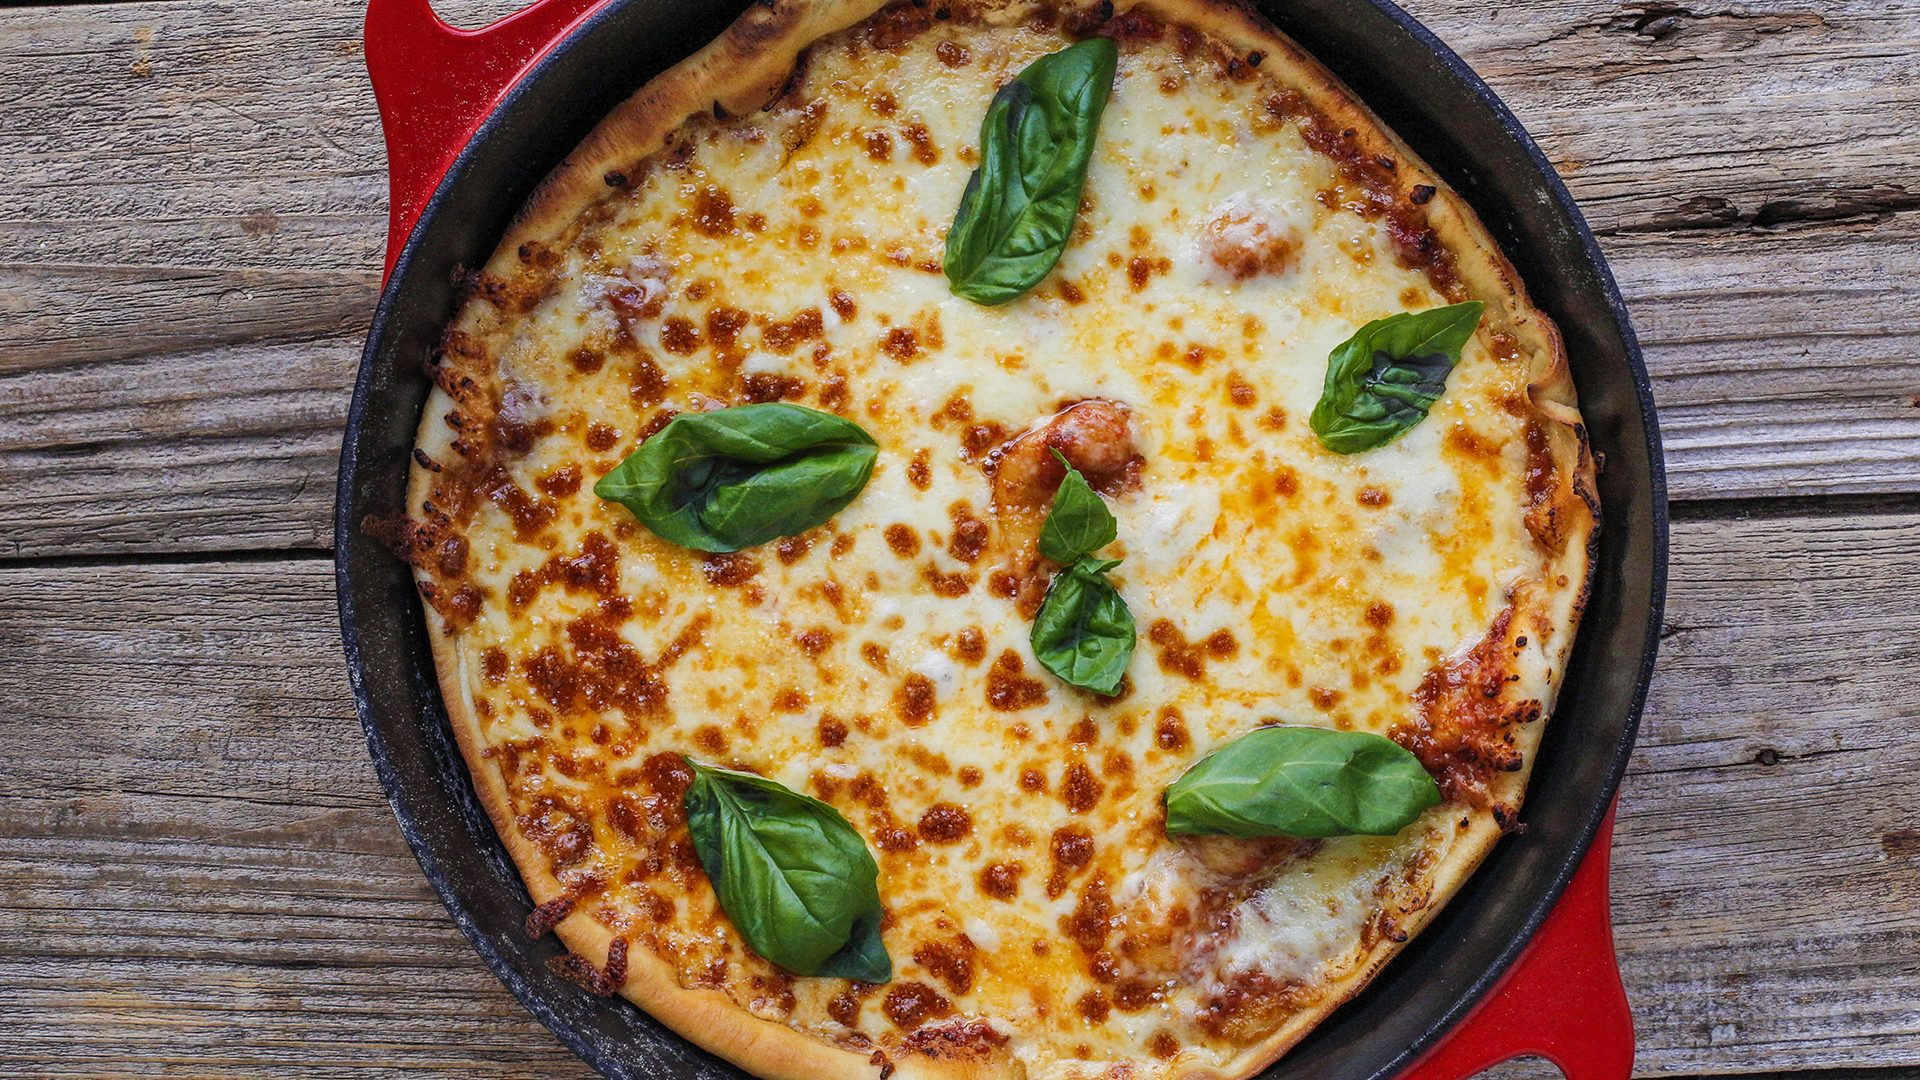 Cast Iron Skillet Pizza Recipe - We are not Martha